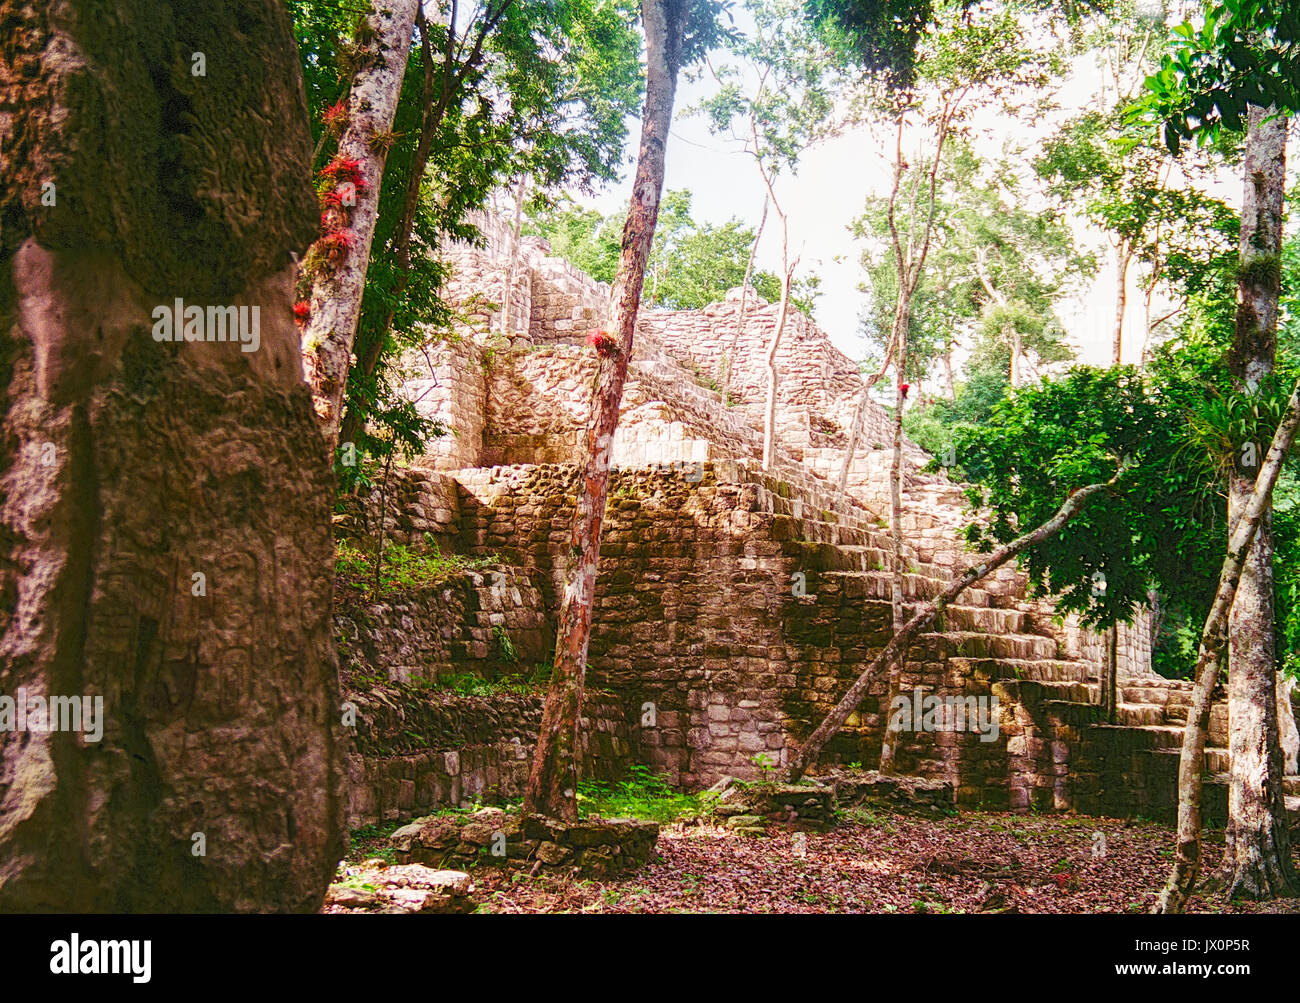 Ancient Mayan ruins at Calakmul, Campeche, Mexico. These ruins were in the process of clearing out all the jungle overgroth and beginning reconstruction.  Vintage photo - 1996 - Kodak Film Stock Photo